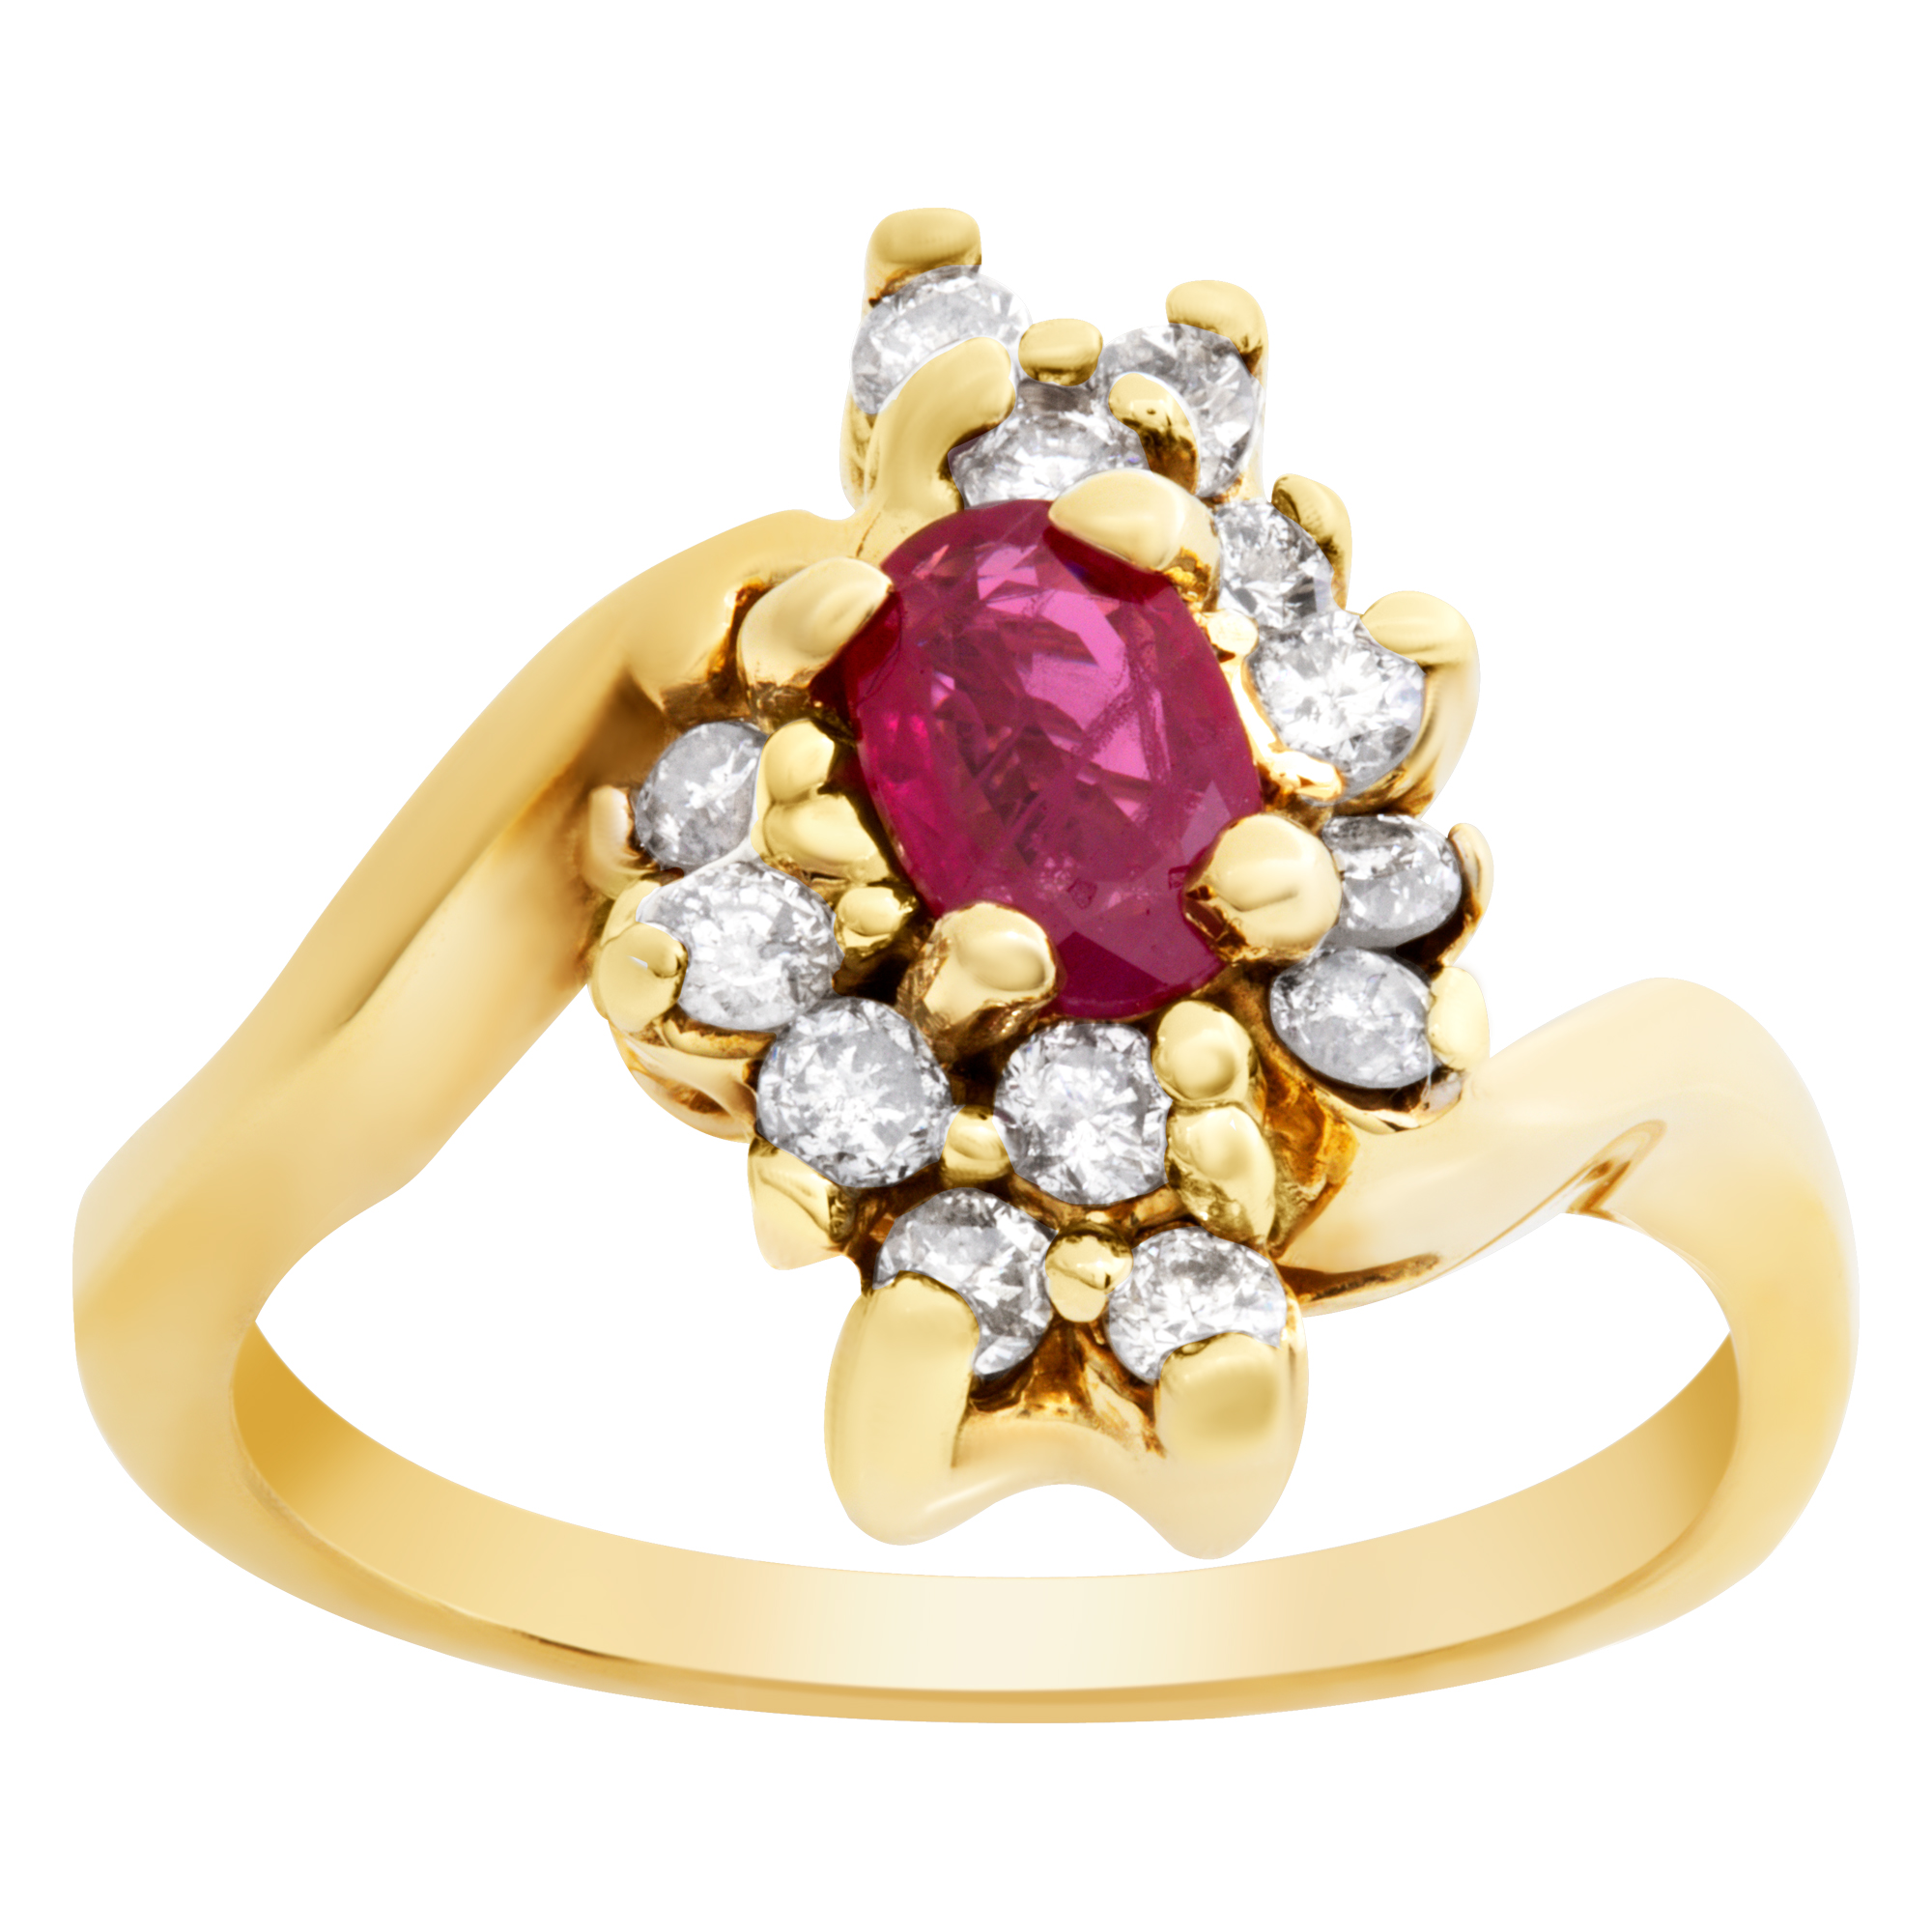 Oval ruby and diamond ring 18k yellow gold. Size 6